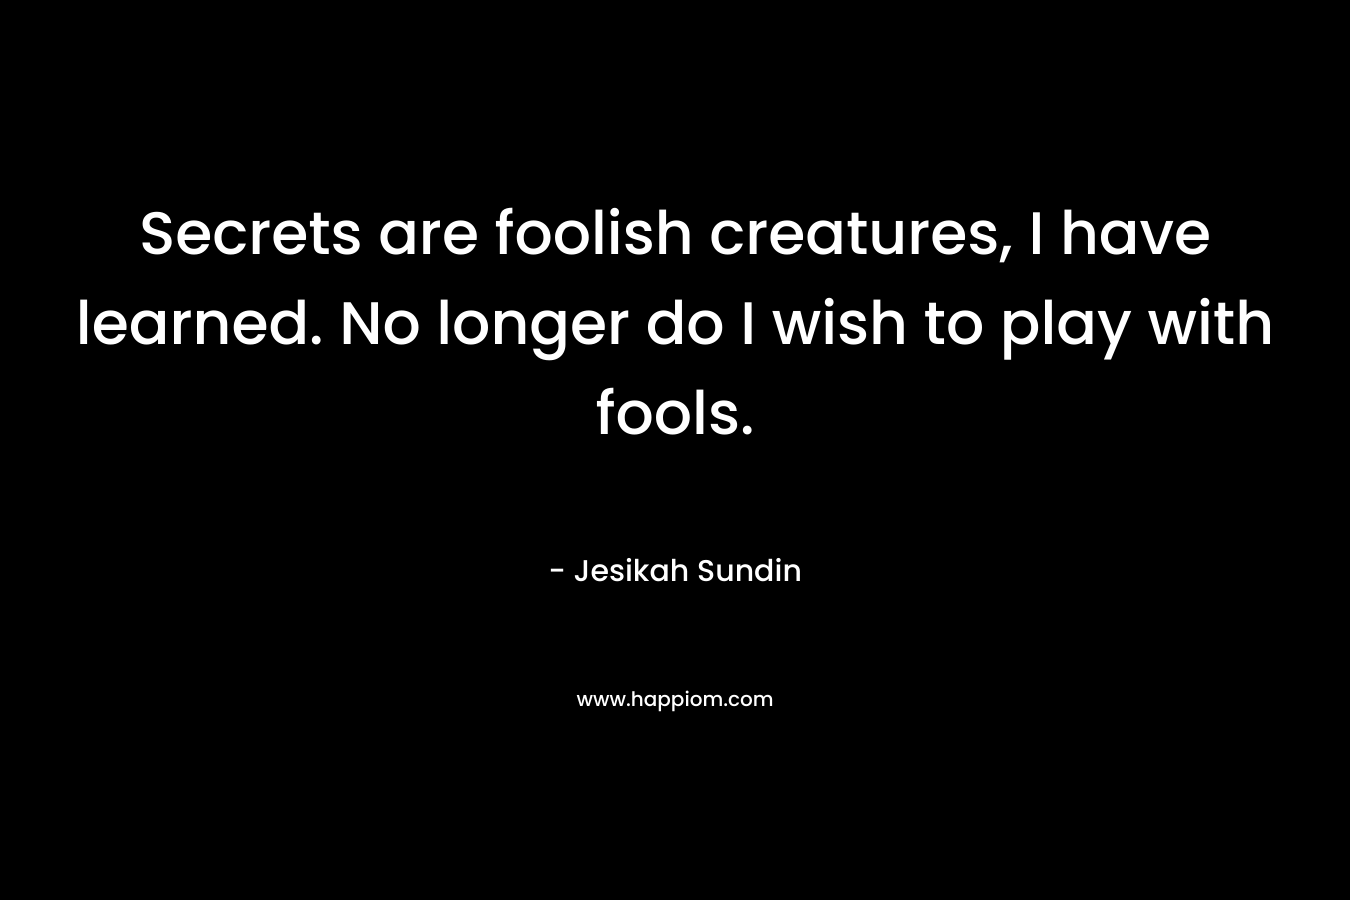 Secrets are foolish creatures, I have learned. No longer do I wish to play with fools.